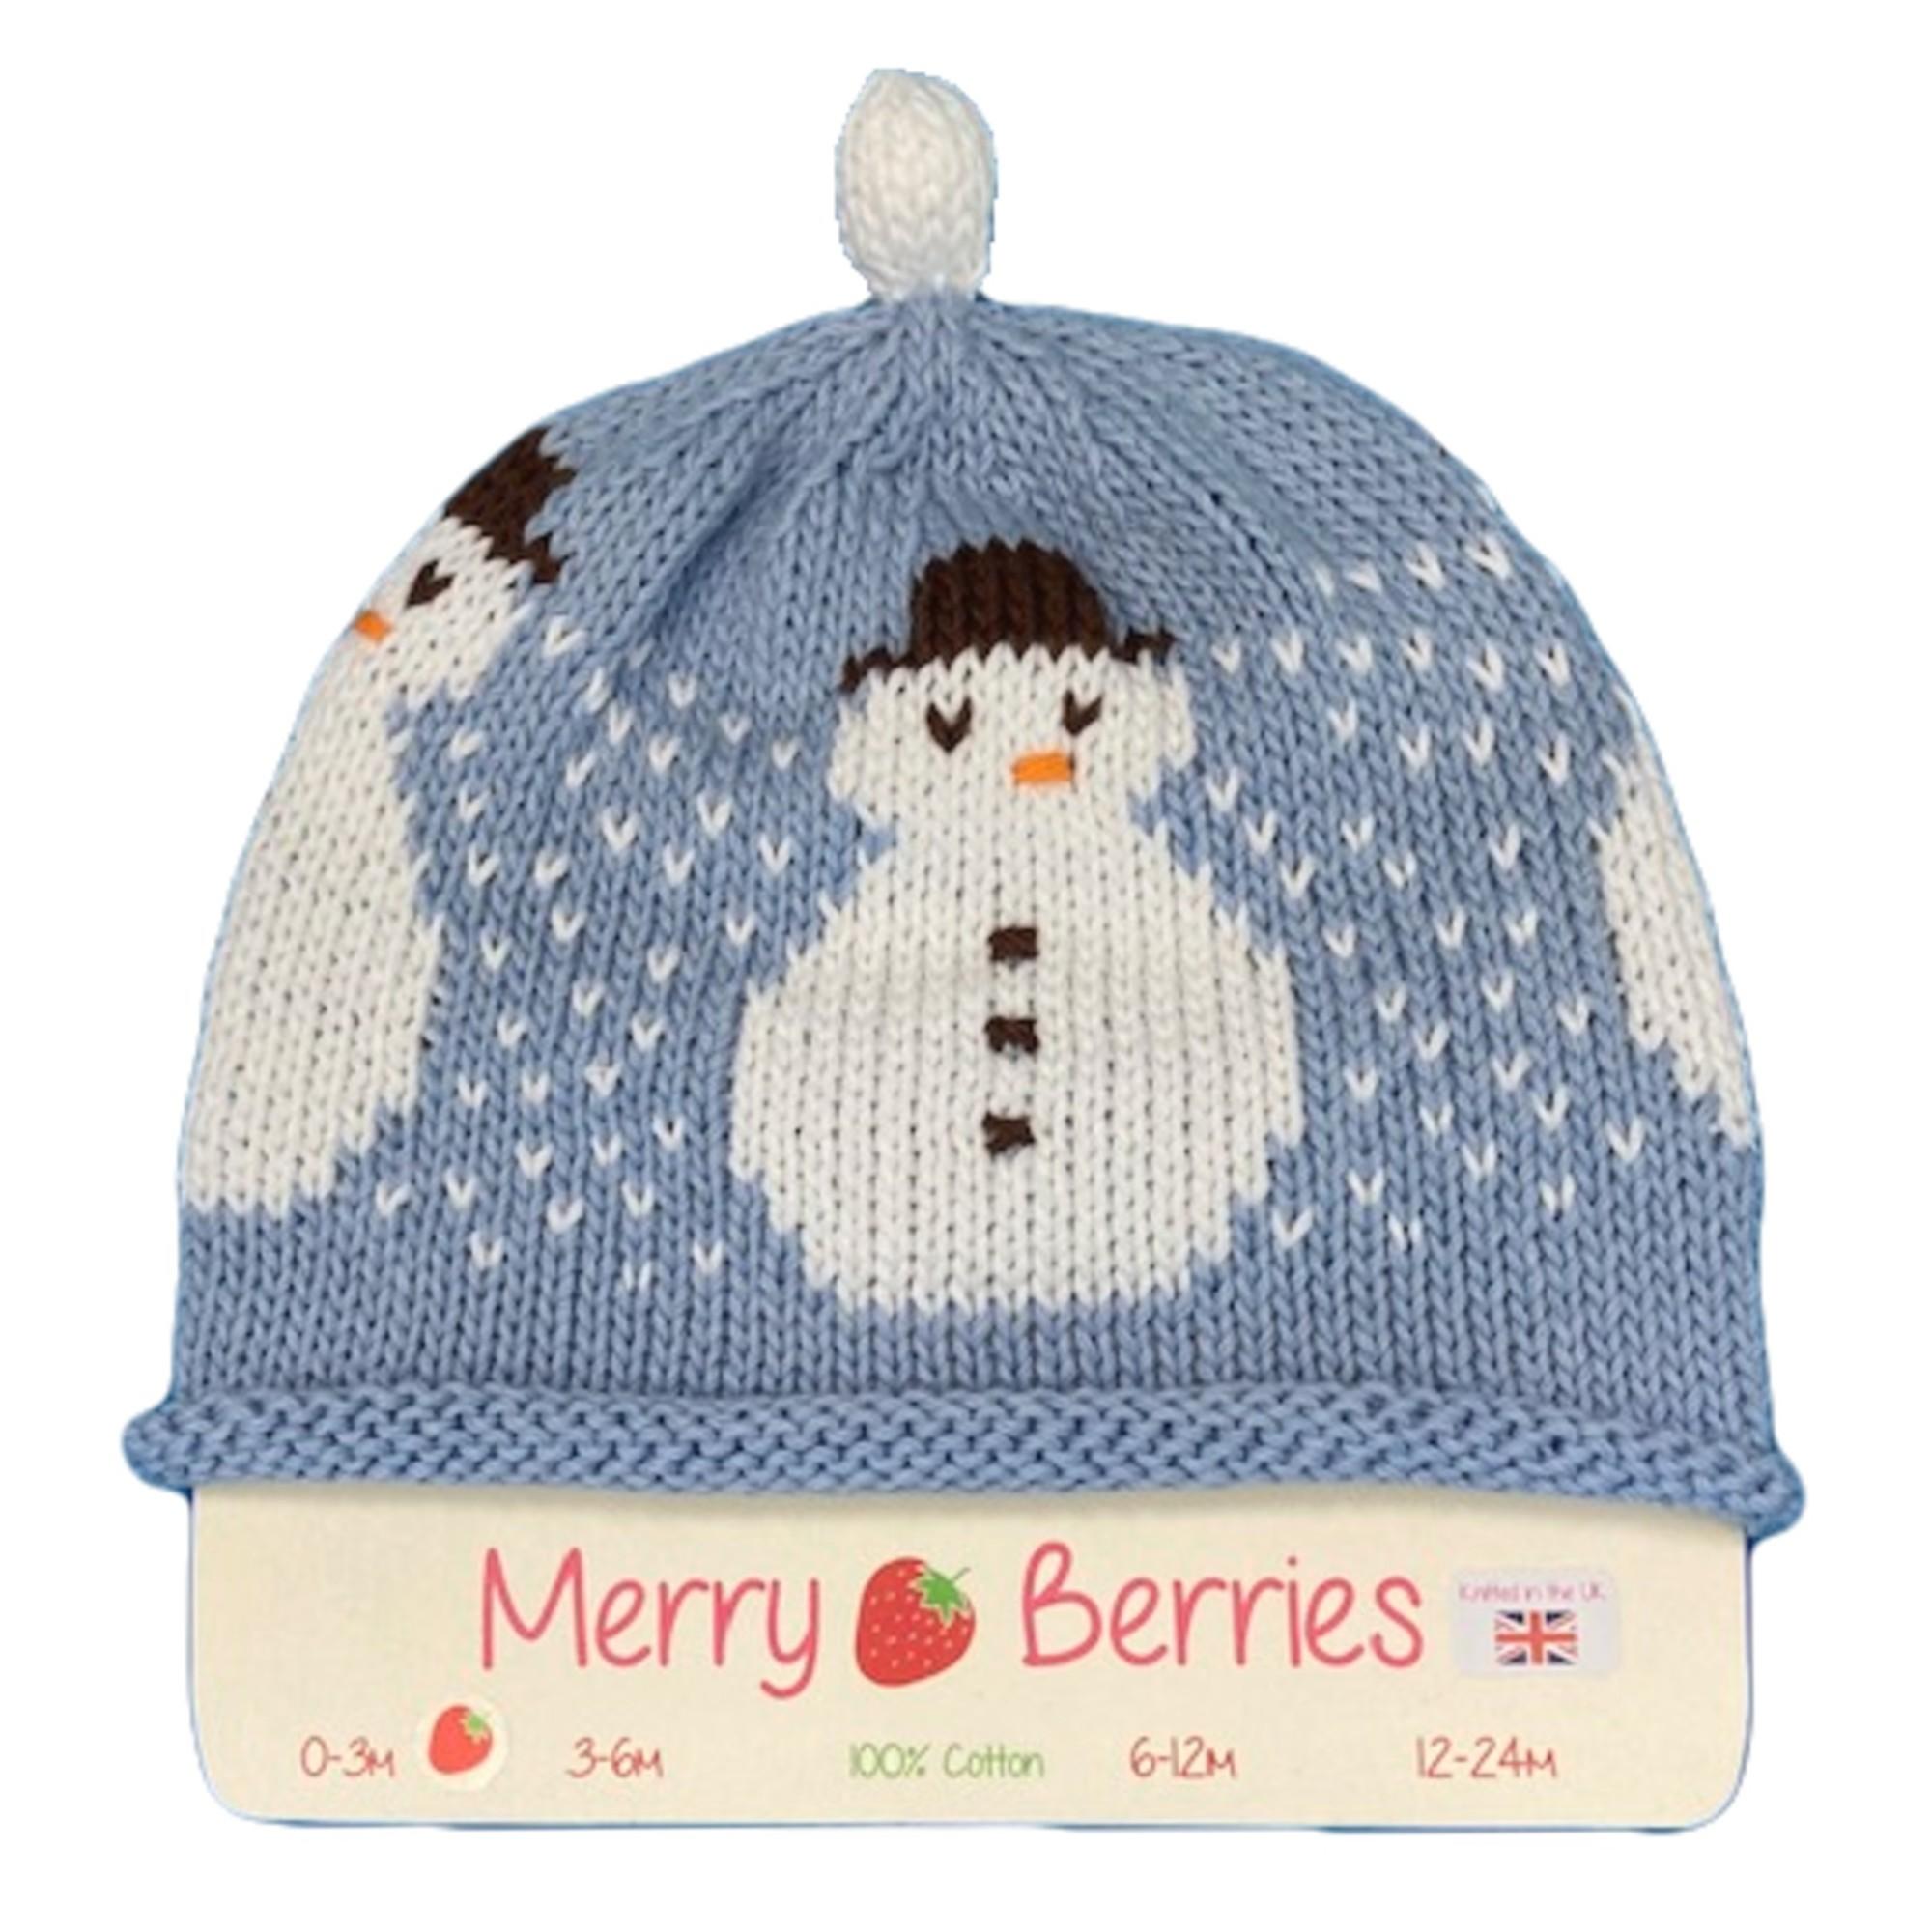 Merry Berries- Sky white Snowman Knitted Baby Hat- 0-24 Months- Cotton